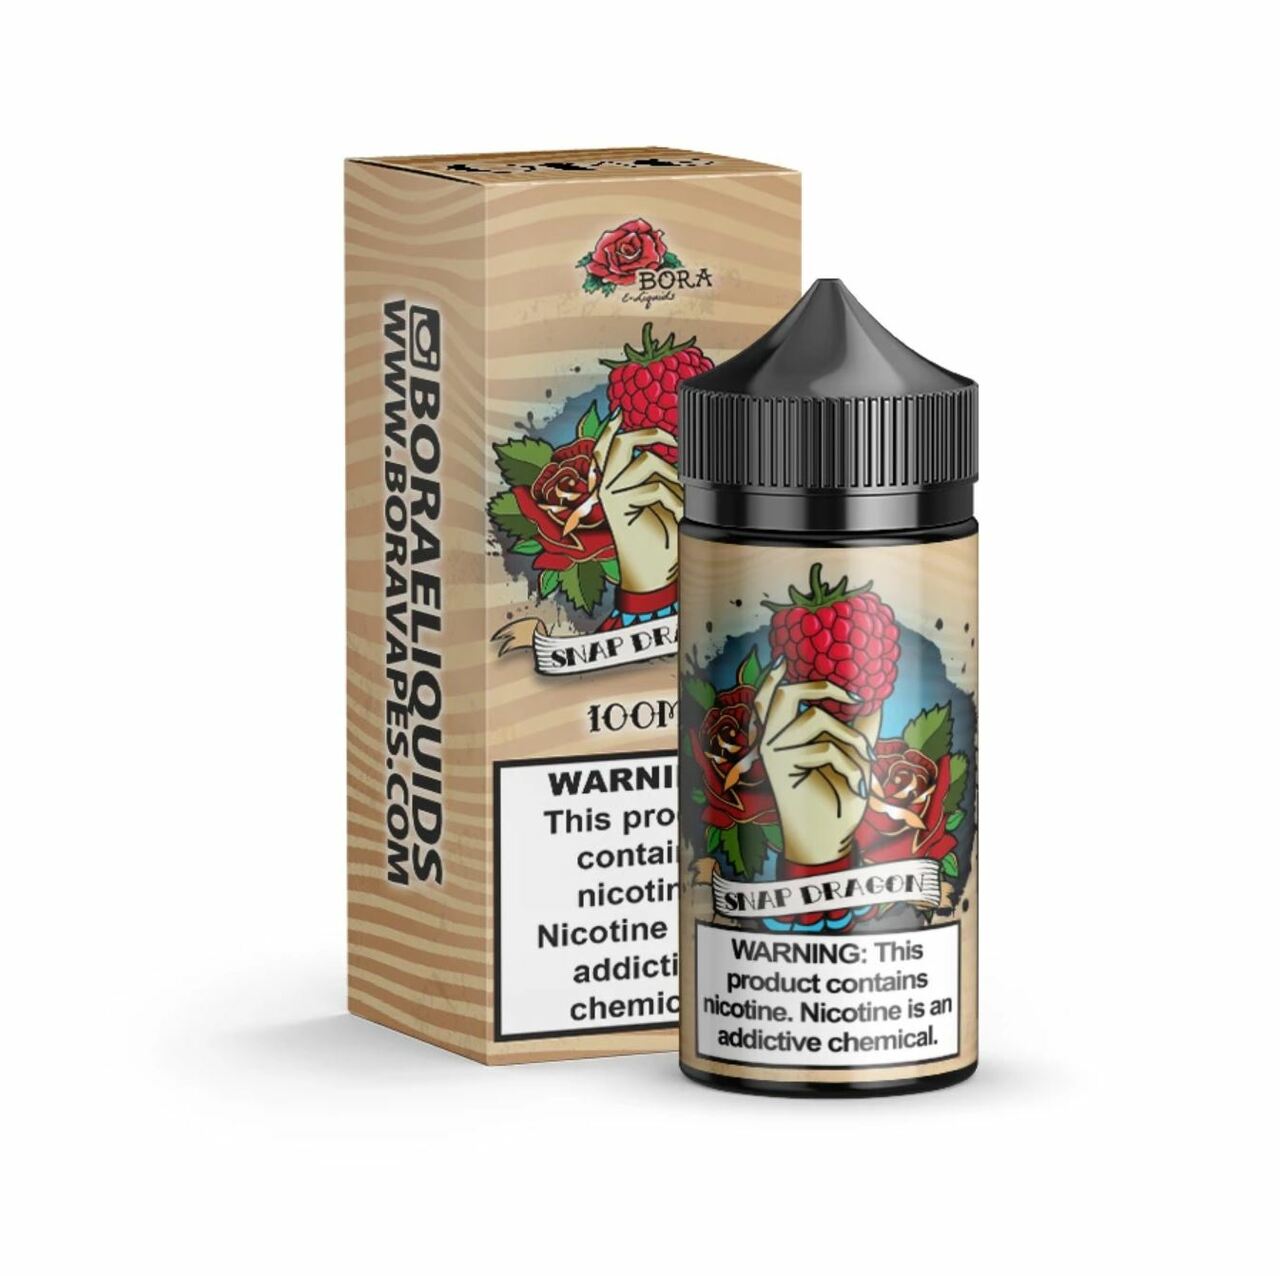 Snap Dragon by Bora Series 100mL with Packaging